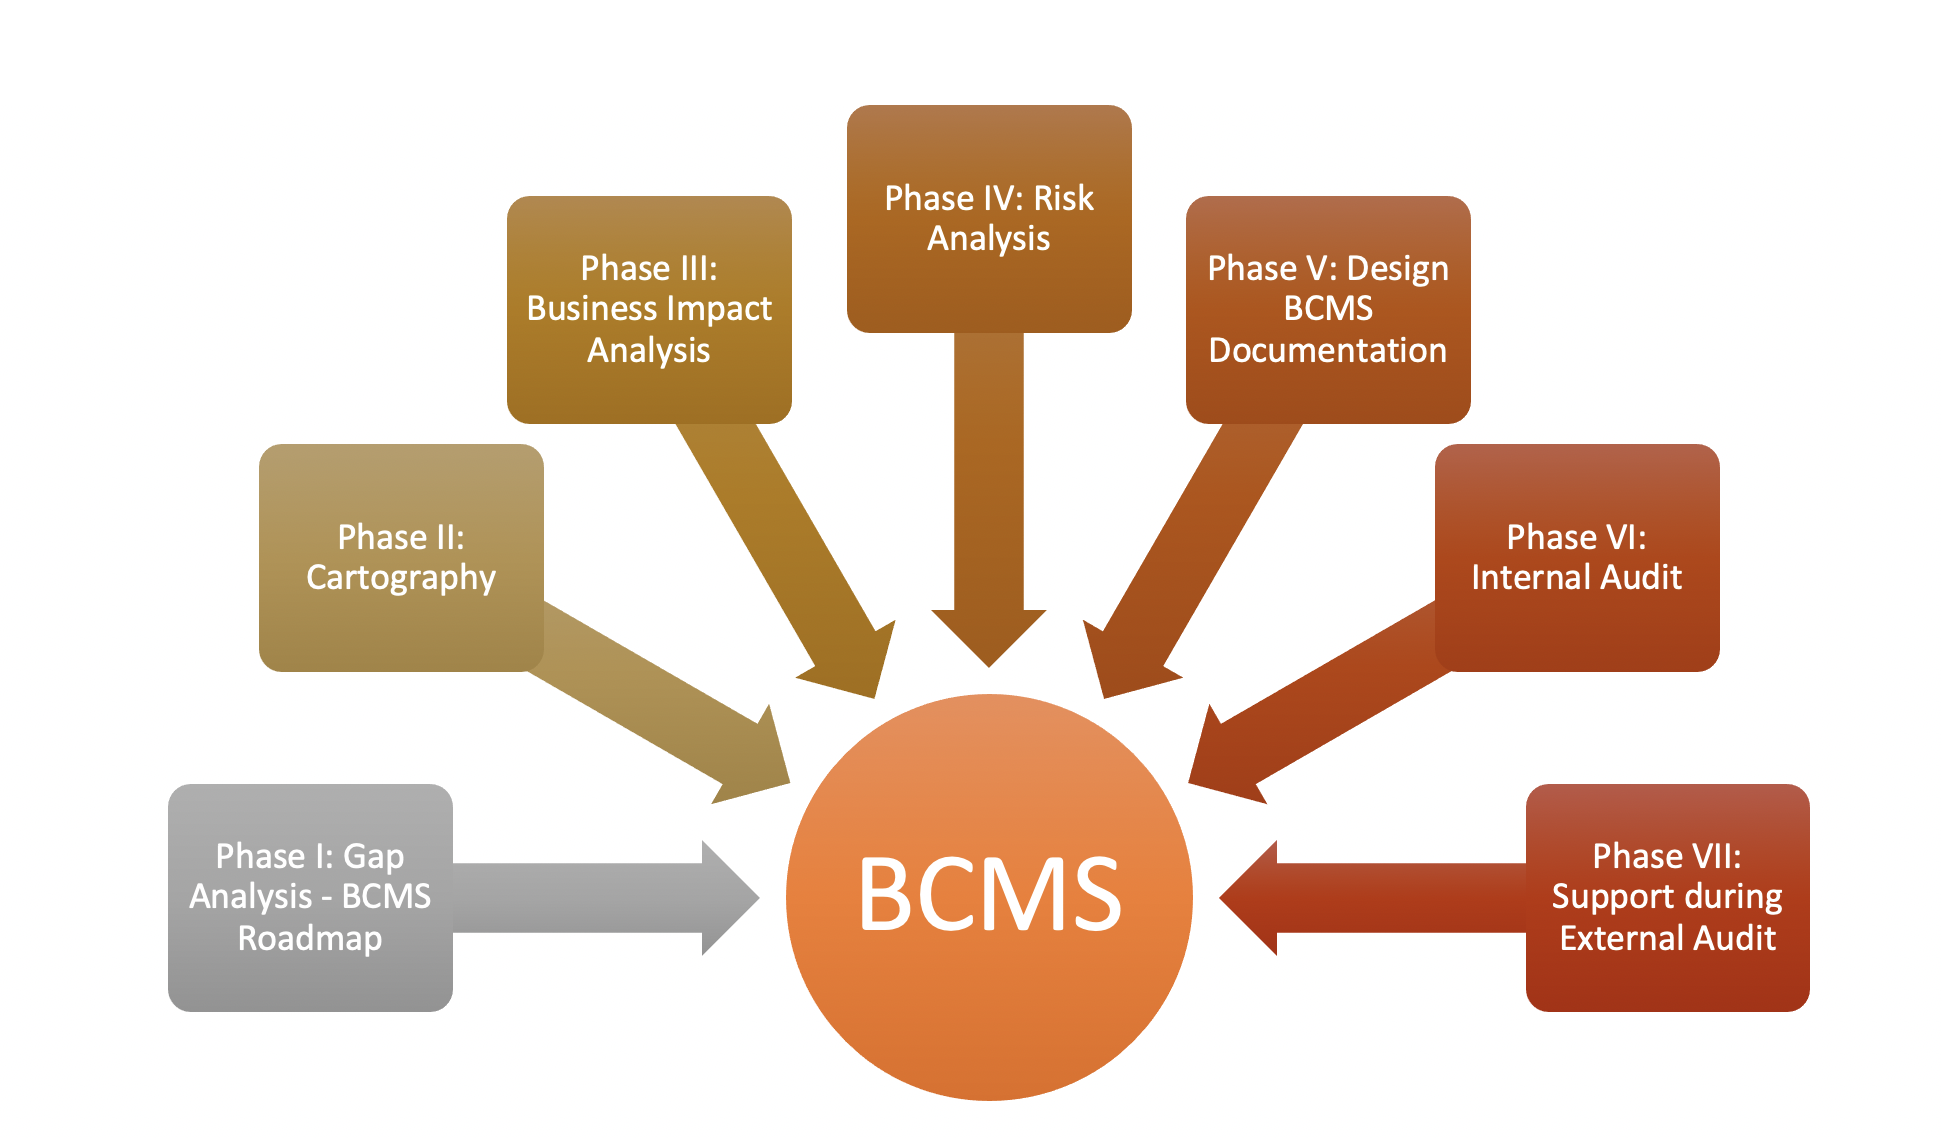 business continuity management it systems